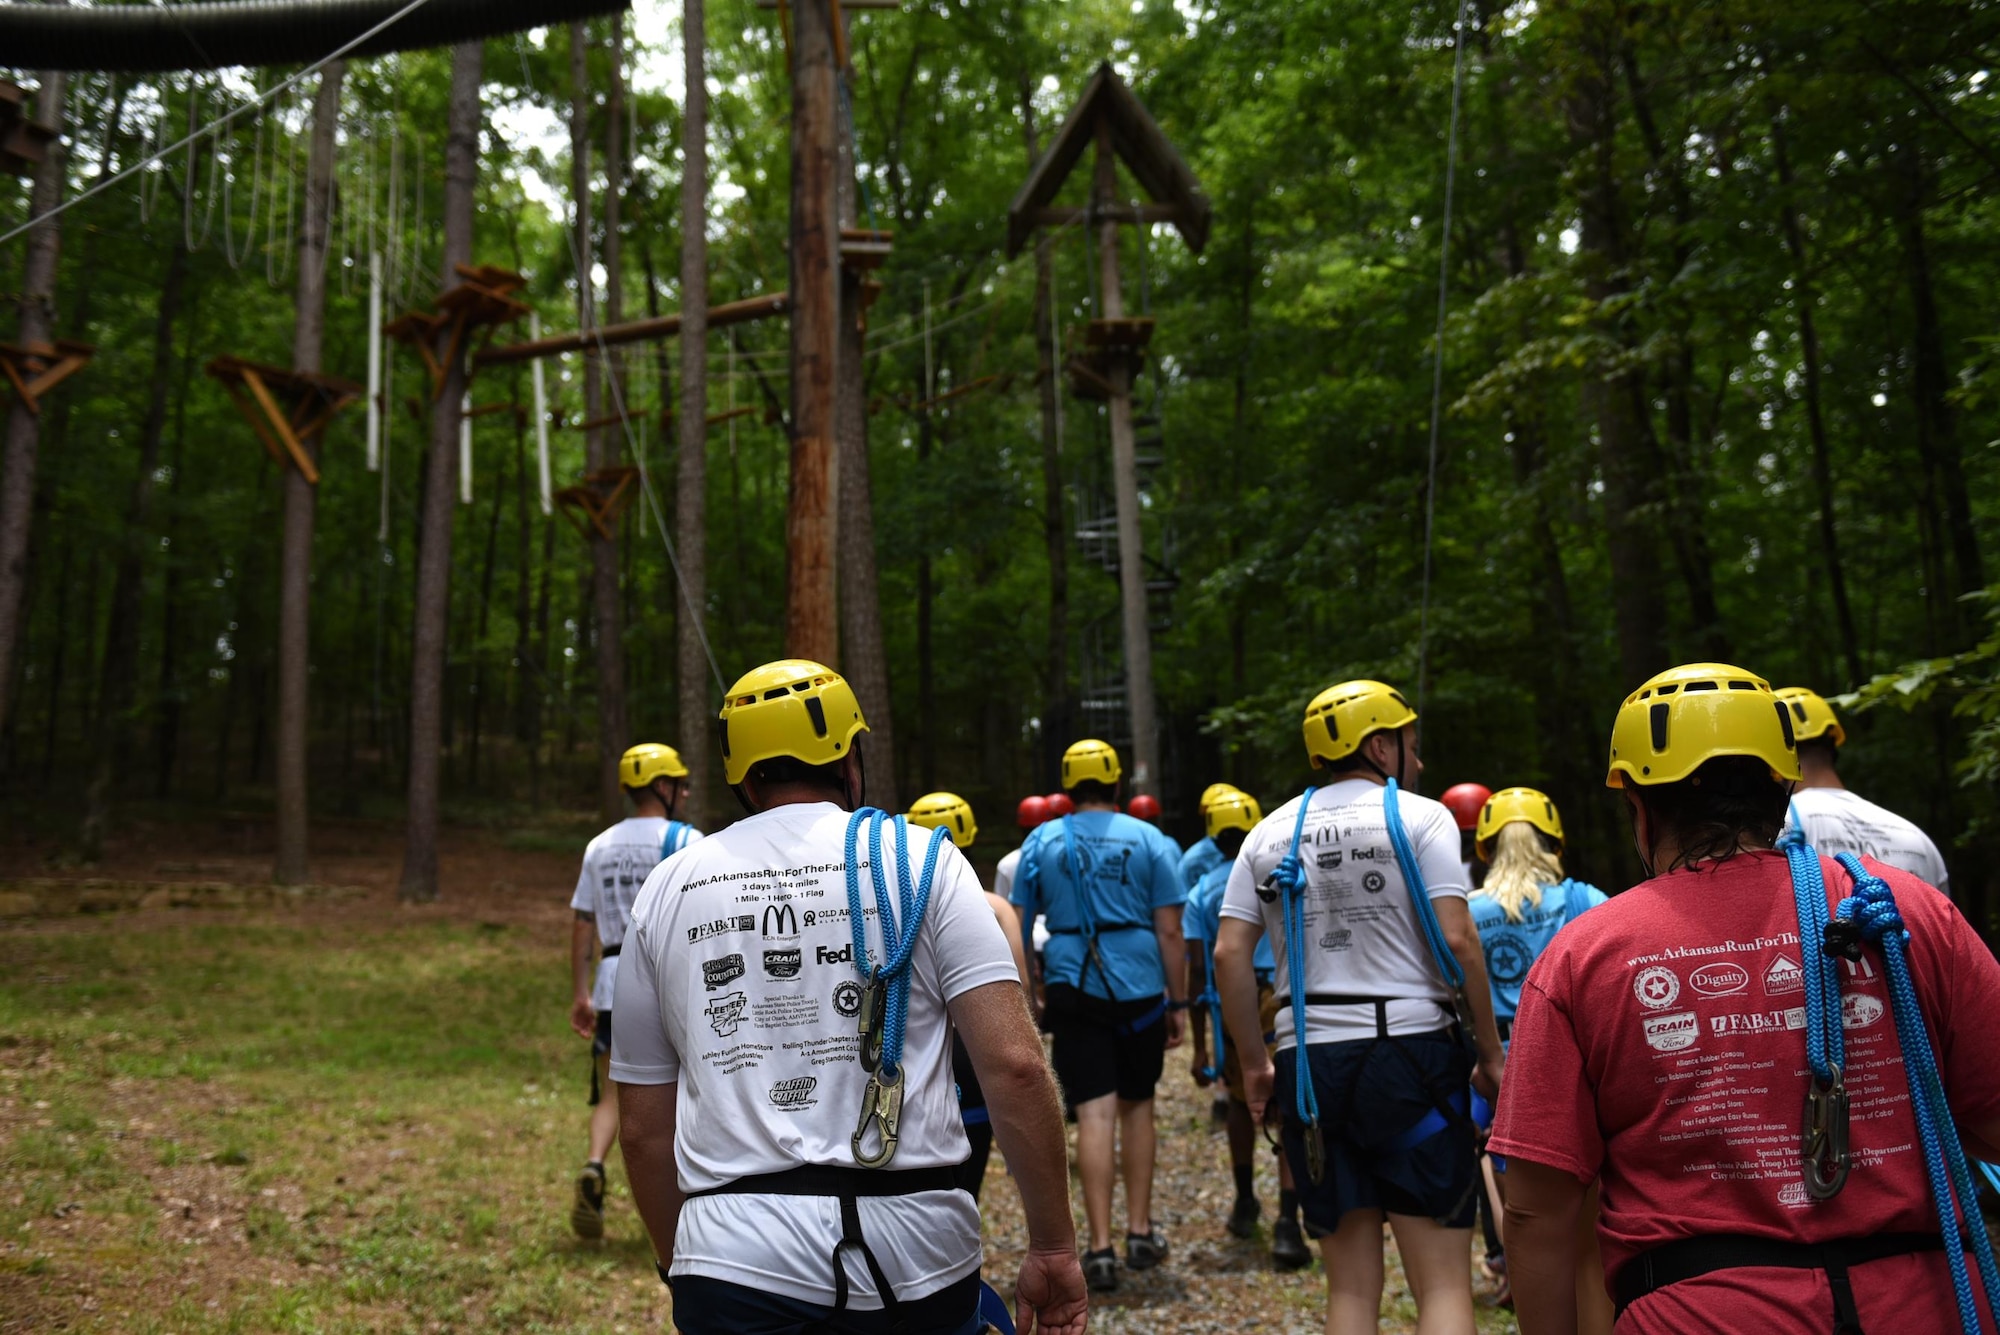 Gold Star children and U.S. Air Force volunteers walk to an obstacle course June 15, 2017, at the Hearts of Our Heroes Camp in Little Rock, Ark. Children ages 9 through 17 participated in different activities such as concerts, obstacle courses and team building exercises. (U.S. Air Force photo by Airman 1st Class Kevin Sommer Giron)